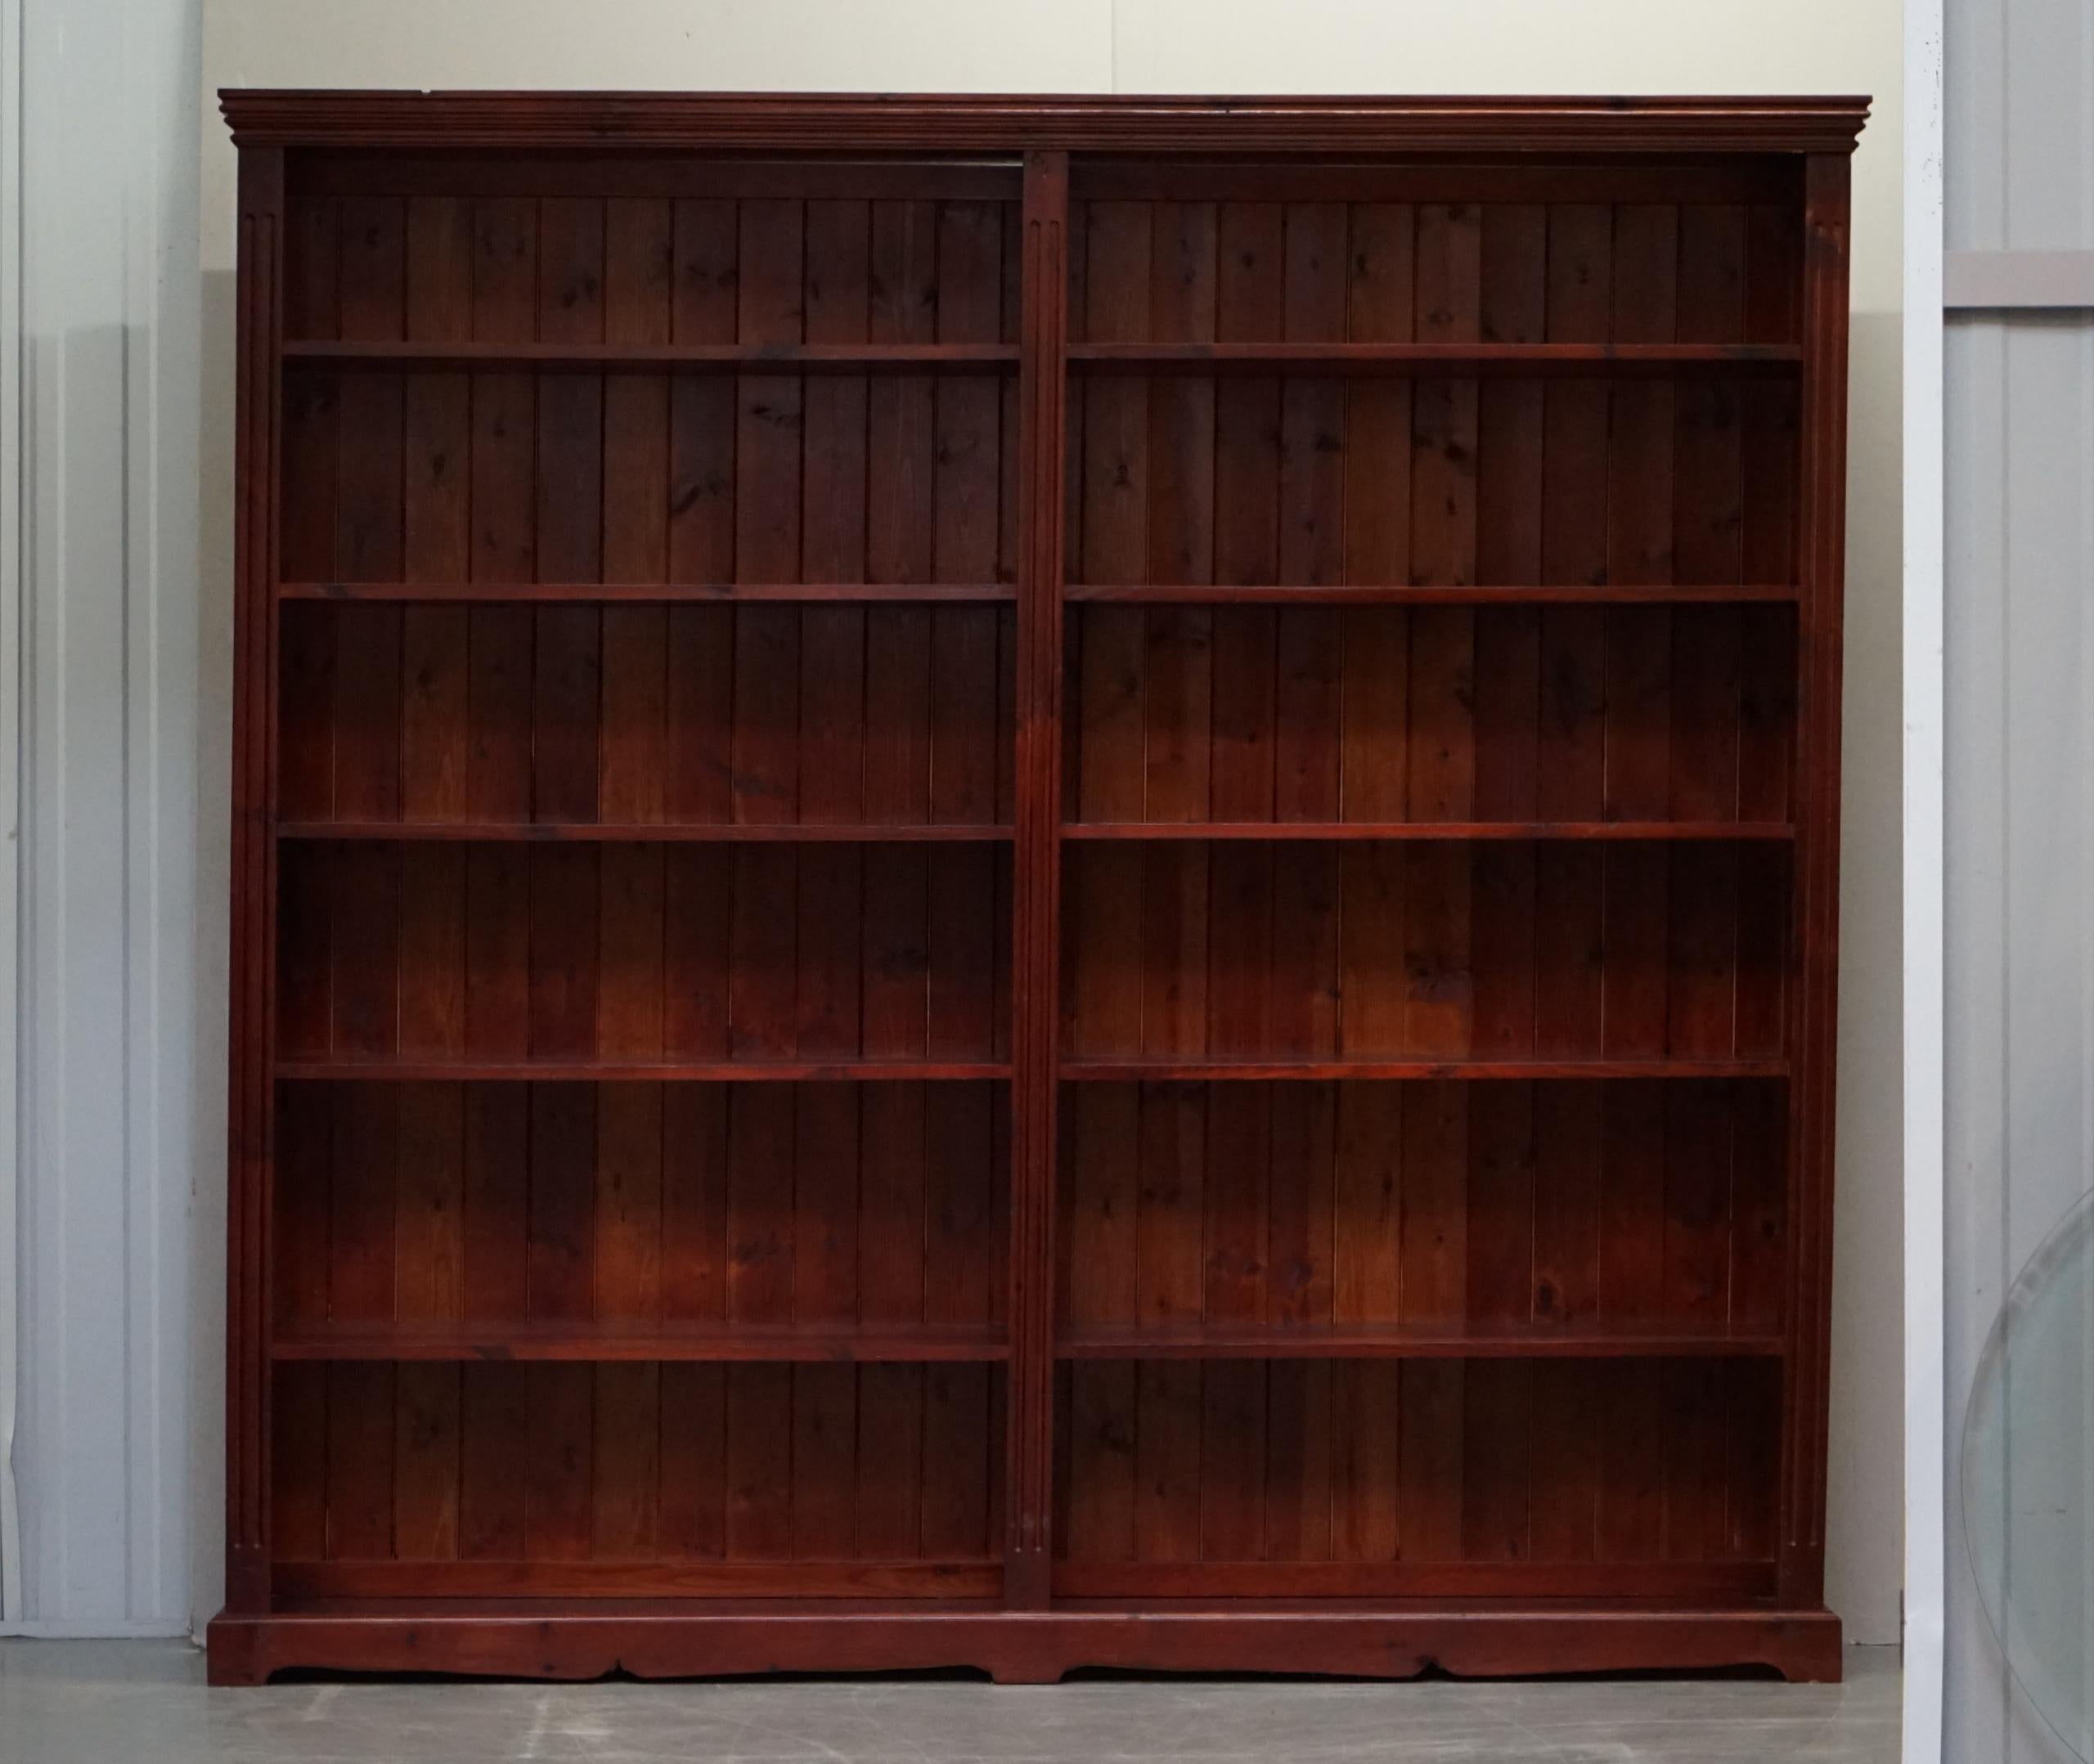 We are delighted to offer this lovely vintage stained pine library bookcase

A good looking and well made bookcase, its stained pine and very English country house. The frame splits into four easy to transport pieces, you have the base plinth, two